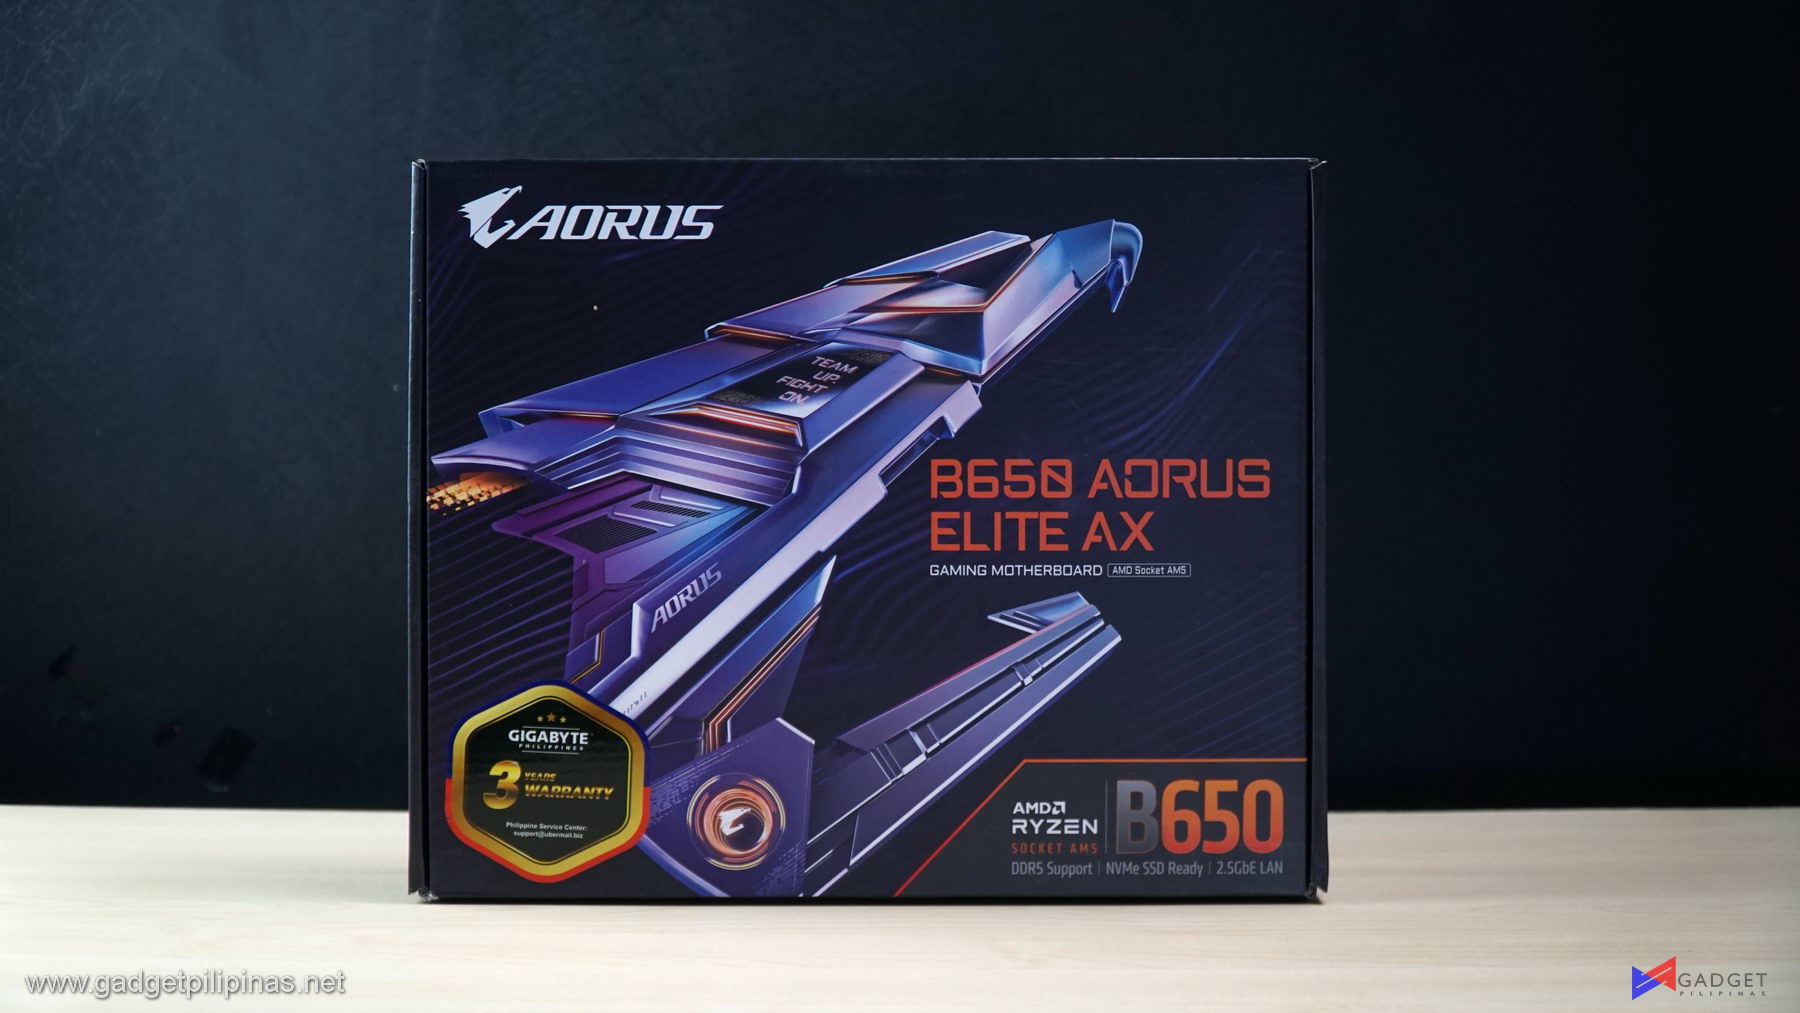 Gigabyte B650 Aorus Elite AX Motherboard Review – Your Entry to the AM5 Platform